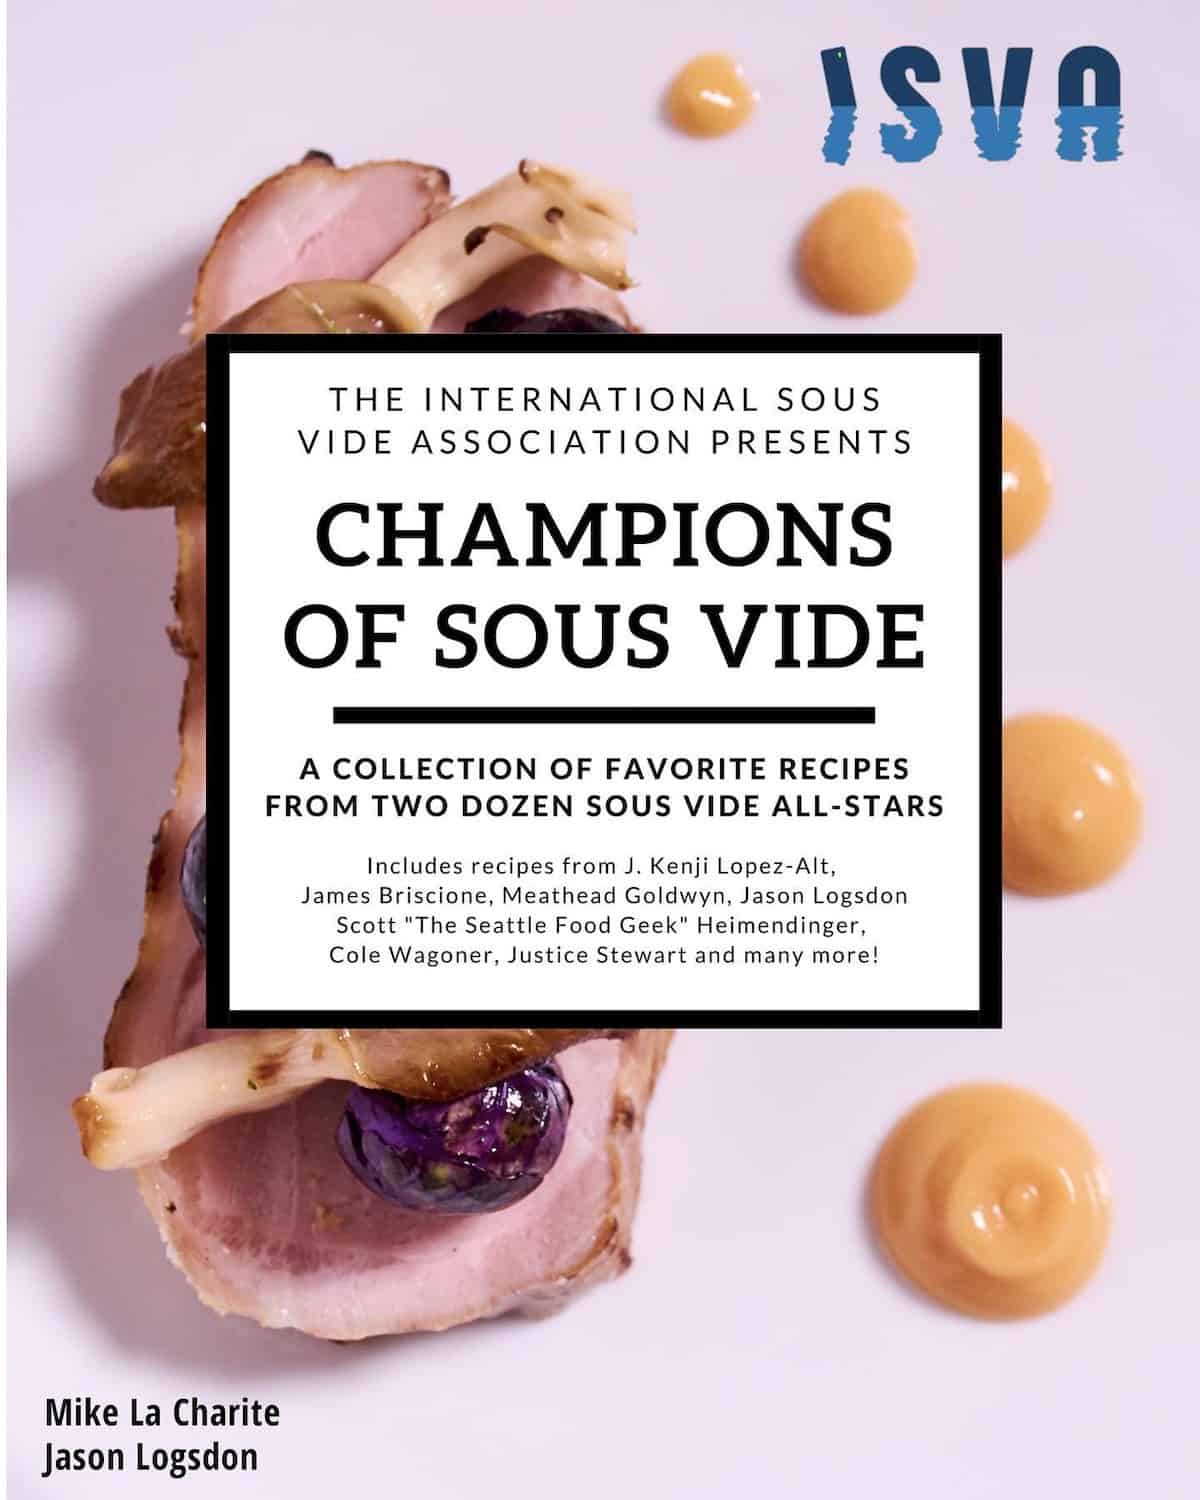 Champions of Sous Vide cookbook provides great learning